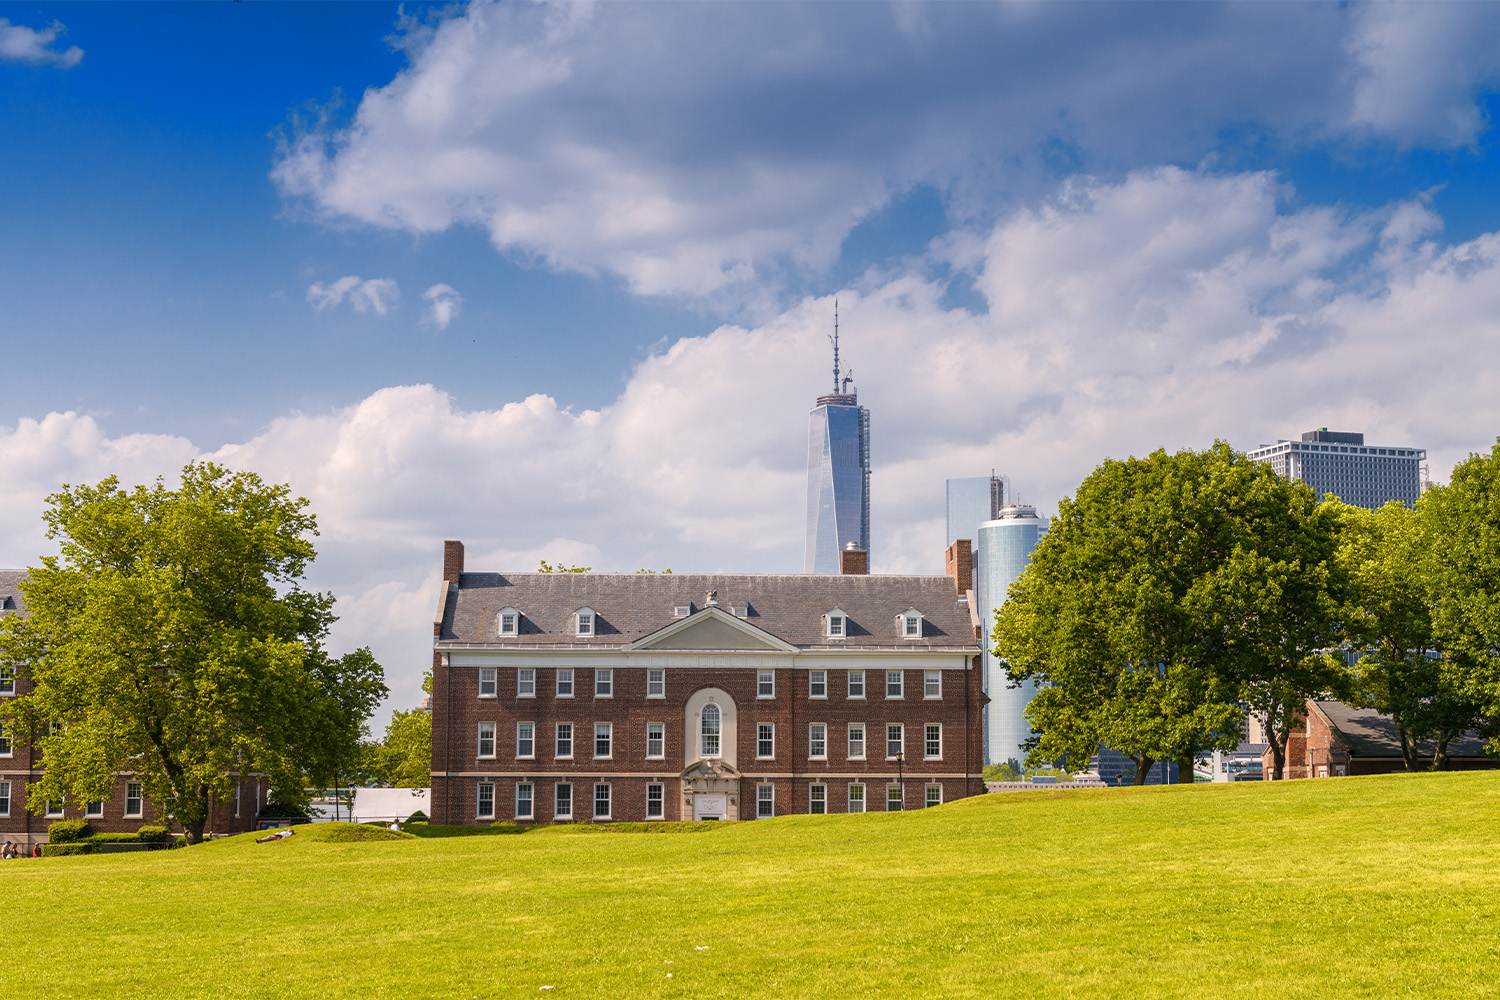 What To Do on Governors Island, New York?